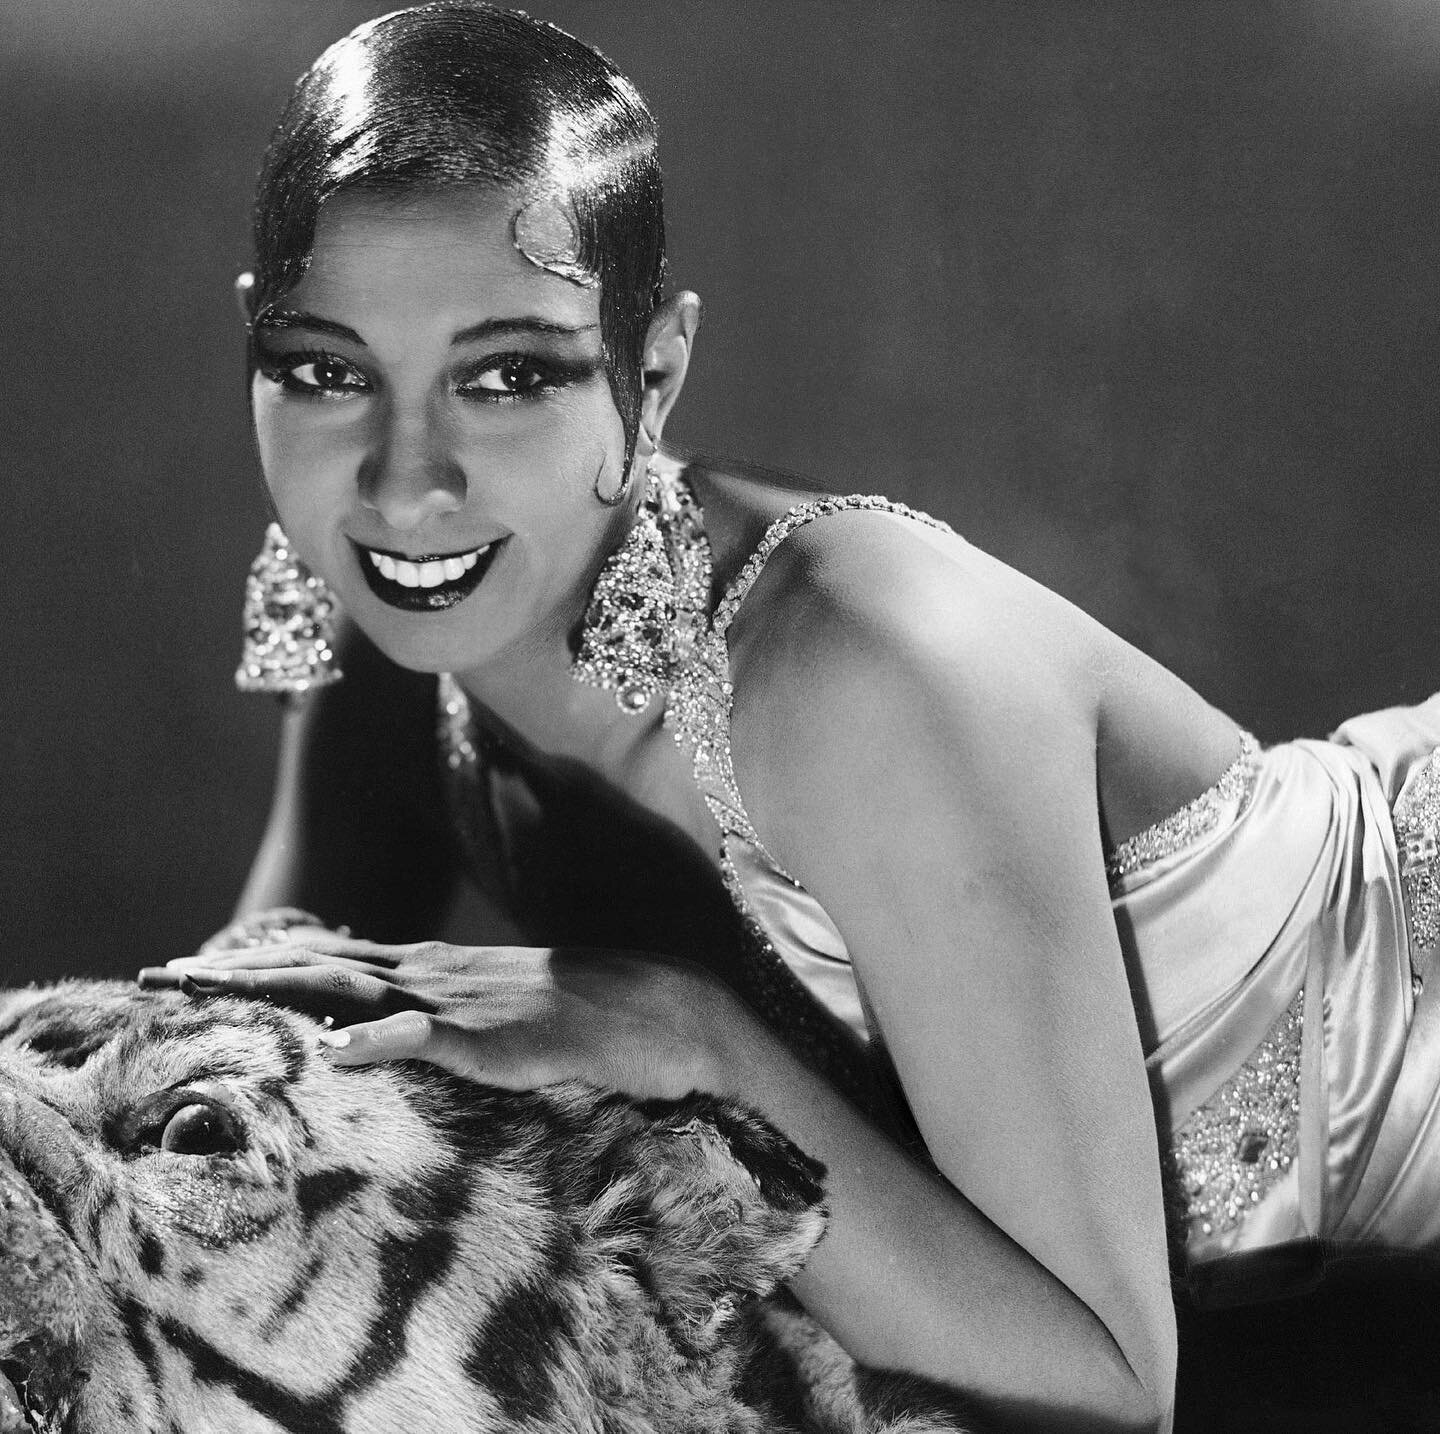 Happy Birthday to Josephine Baker who would&rsquo;ve been 115 yesterday. 
.
.
The original party gal, we like to think she would&rsquo;ve enjoyed Streamertail. We recently heard her amazing story on @greg_jenner &lsquo;s You&rsquo;re Dead to Me podca